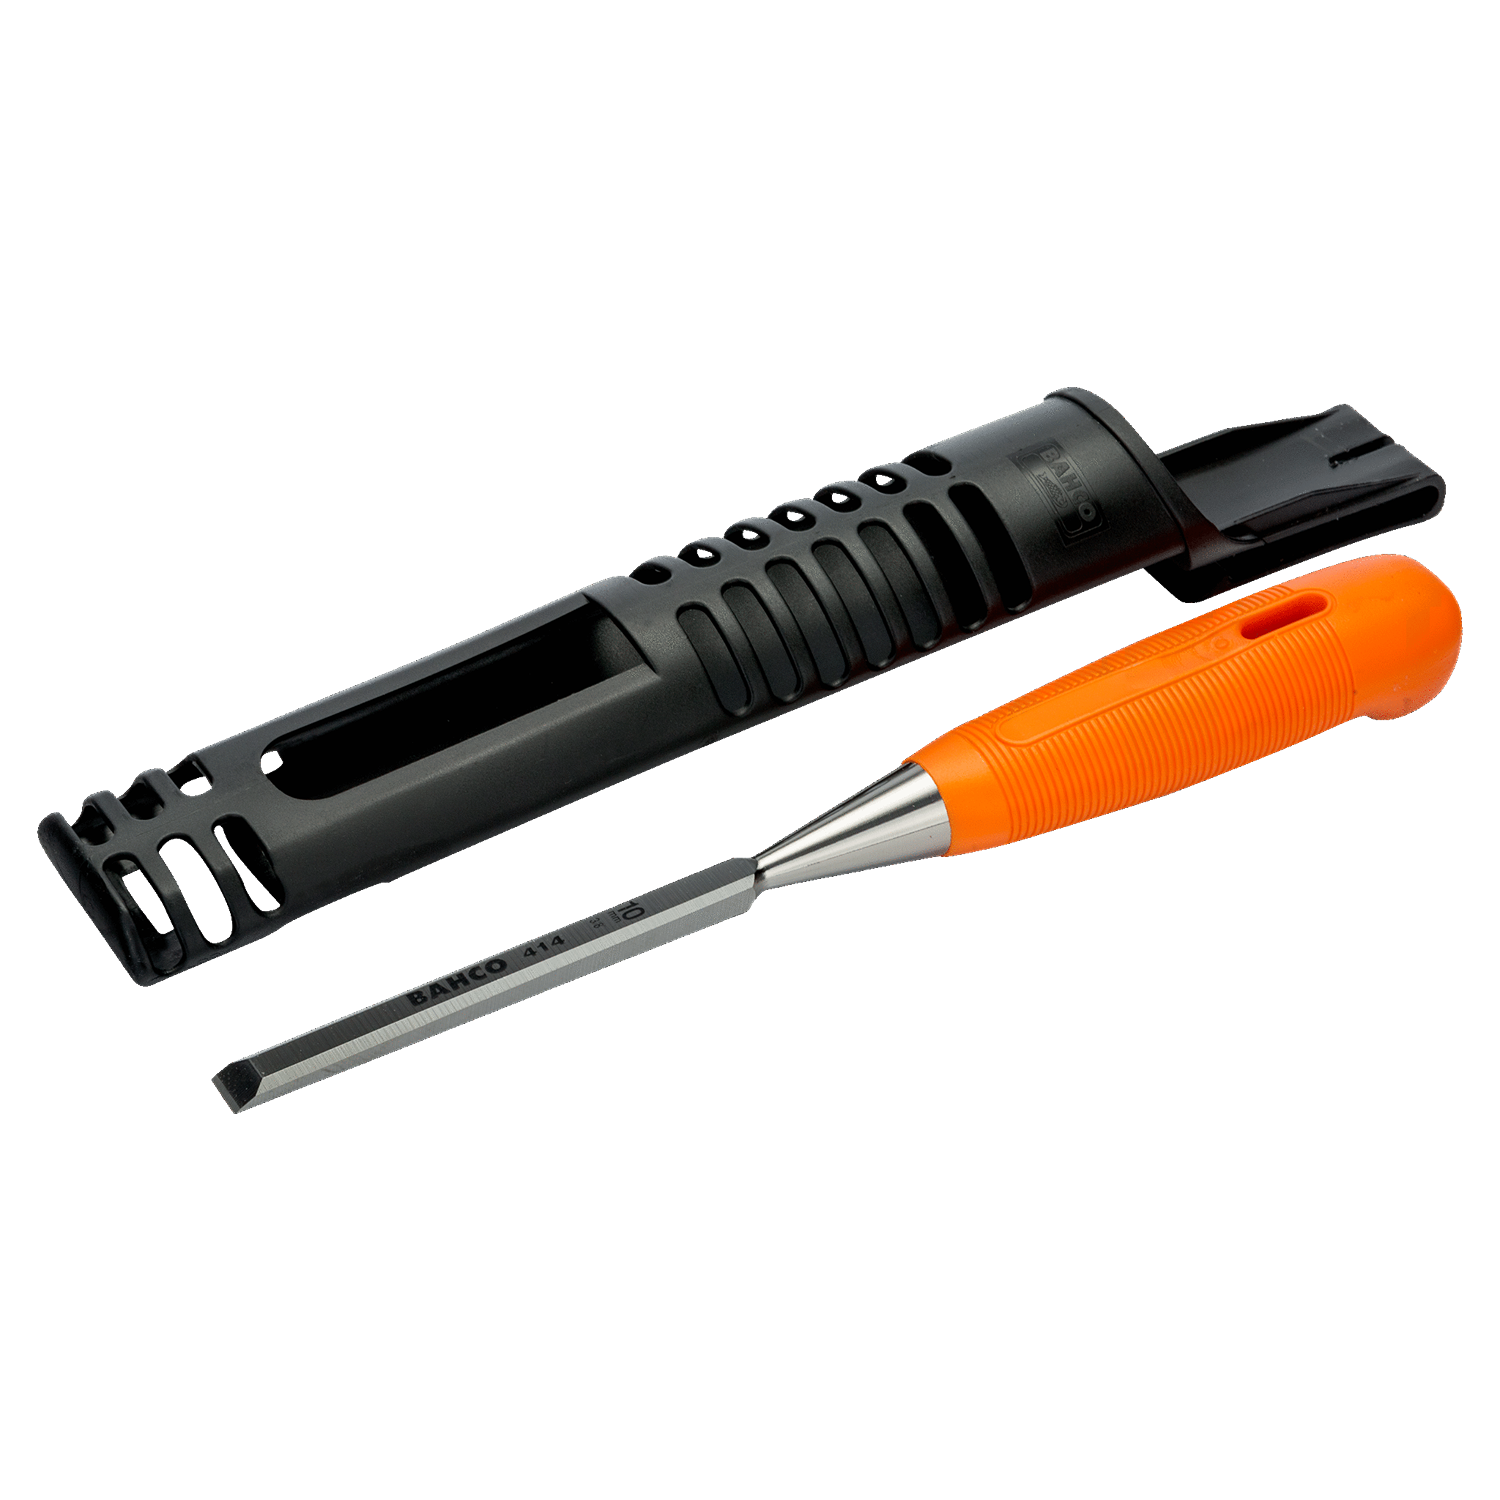 BAHCO 414 Woodworking Chisel with Orange Polypropylene Handle - Premium Woodworking Chisel from BAHCO - Shop now at Yew Aik.